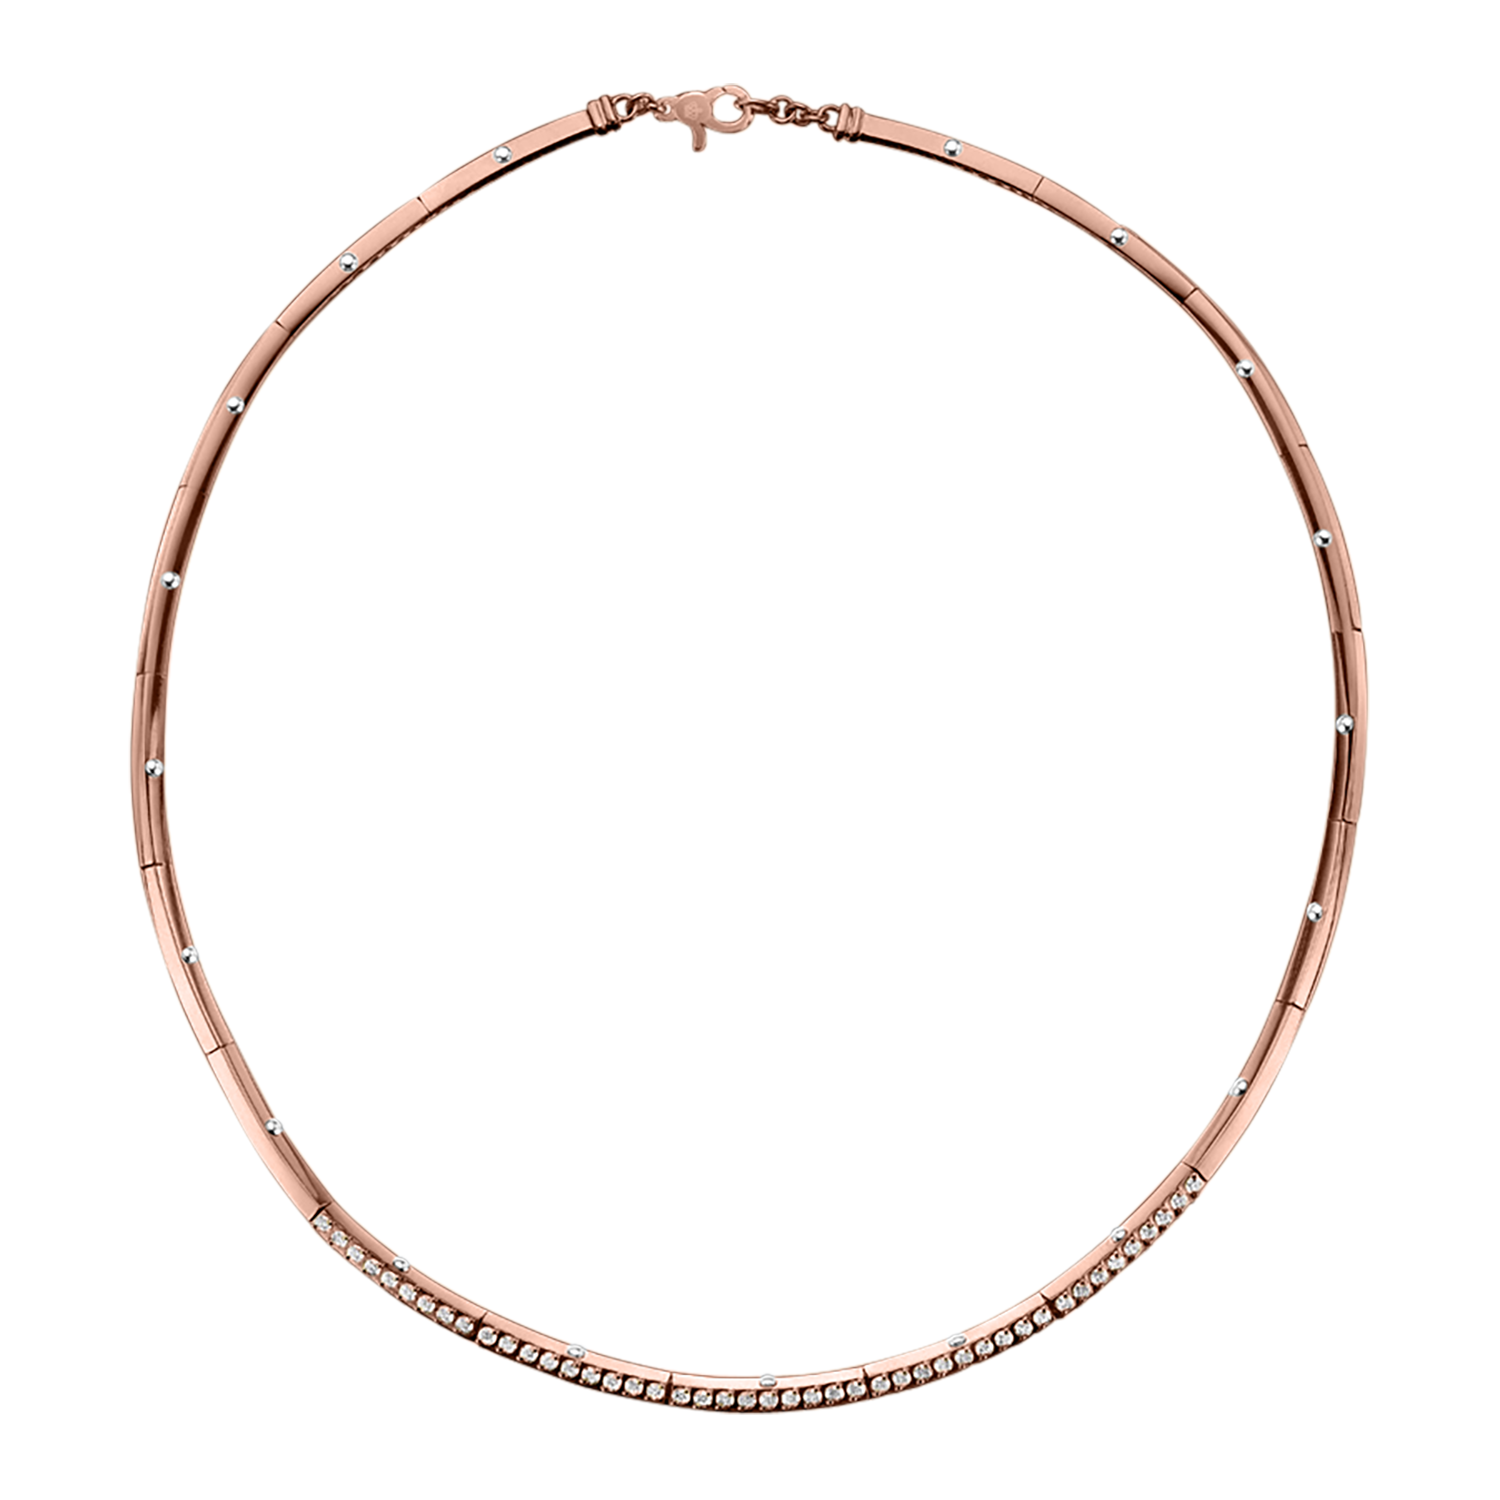 (18k Rose gold with white gold)